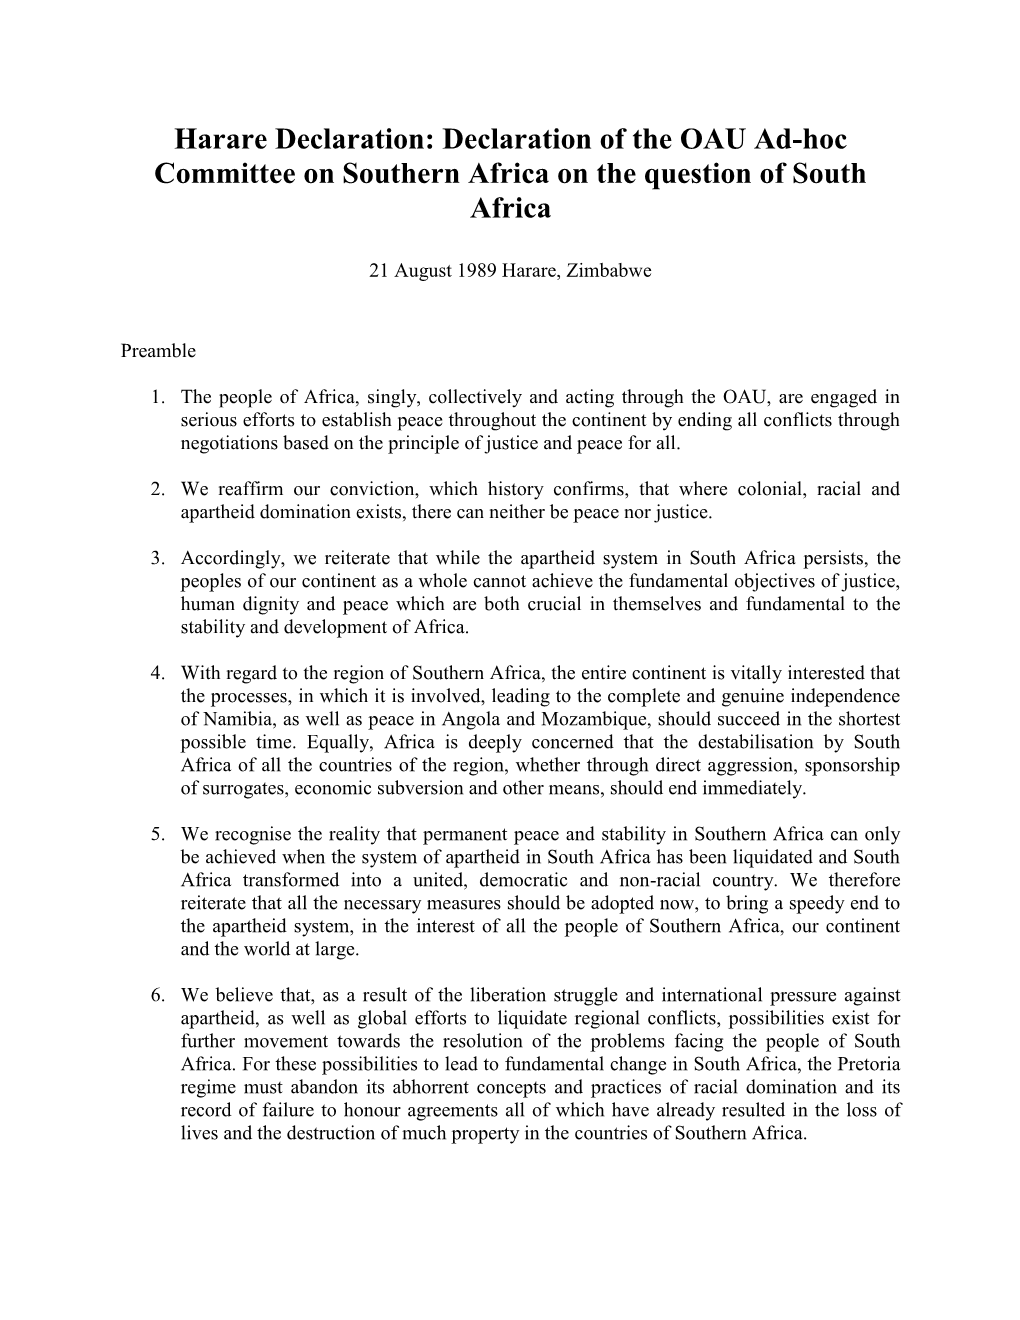 Declaration of the OAU Ad-Hoc Committee on Southern Africa on the Question of South Africa